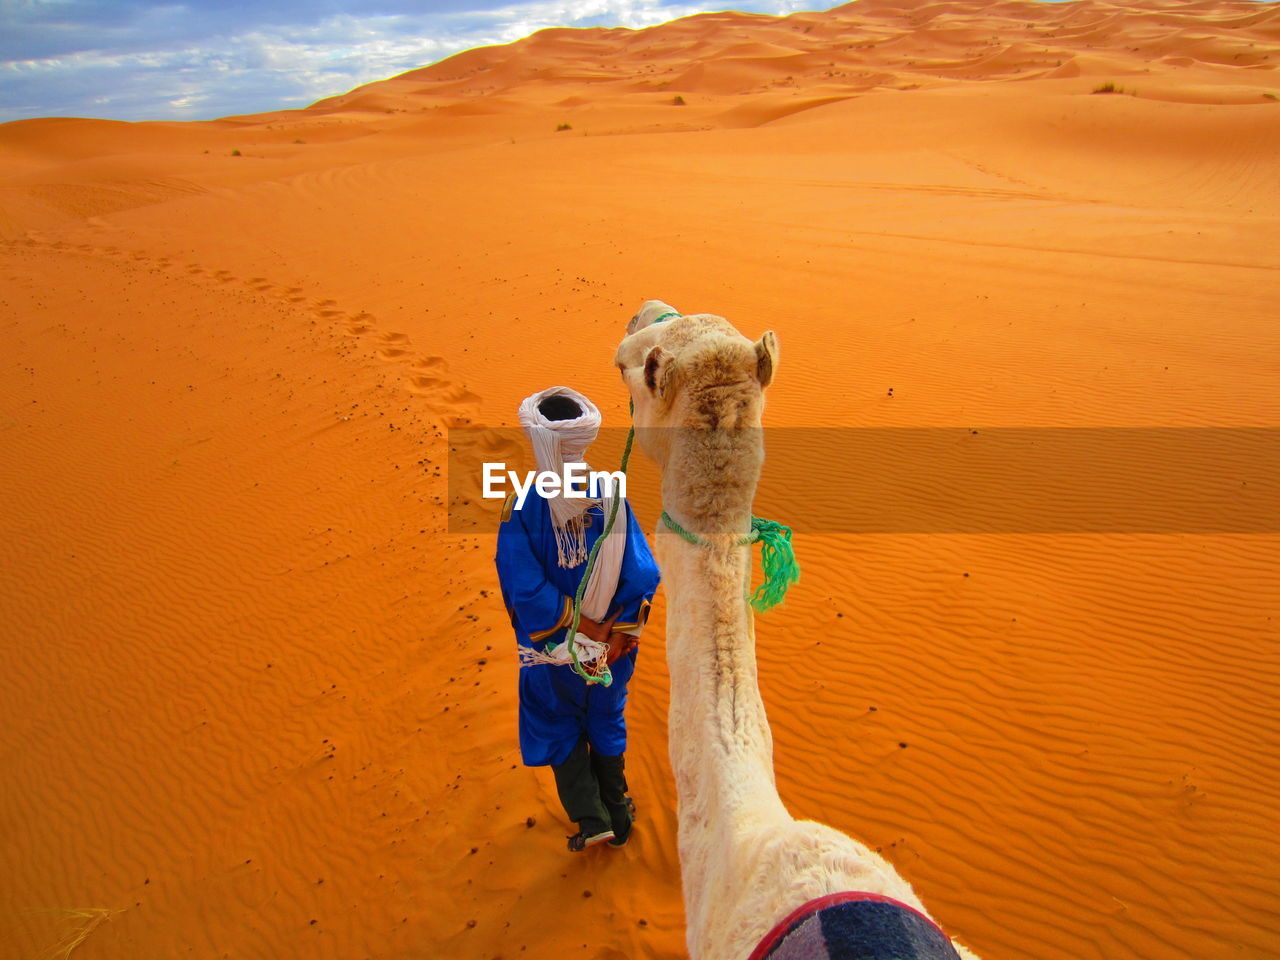 Man with camel standing on sand